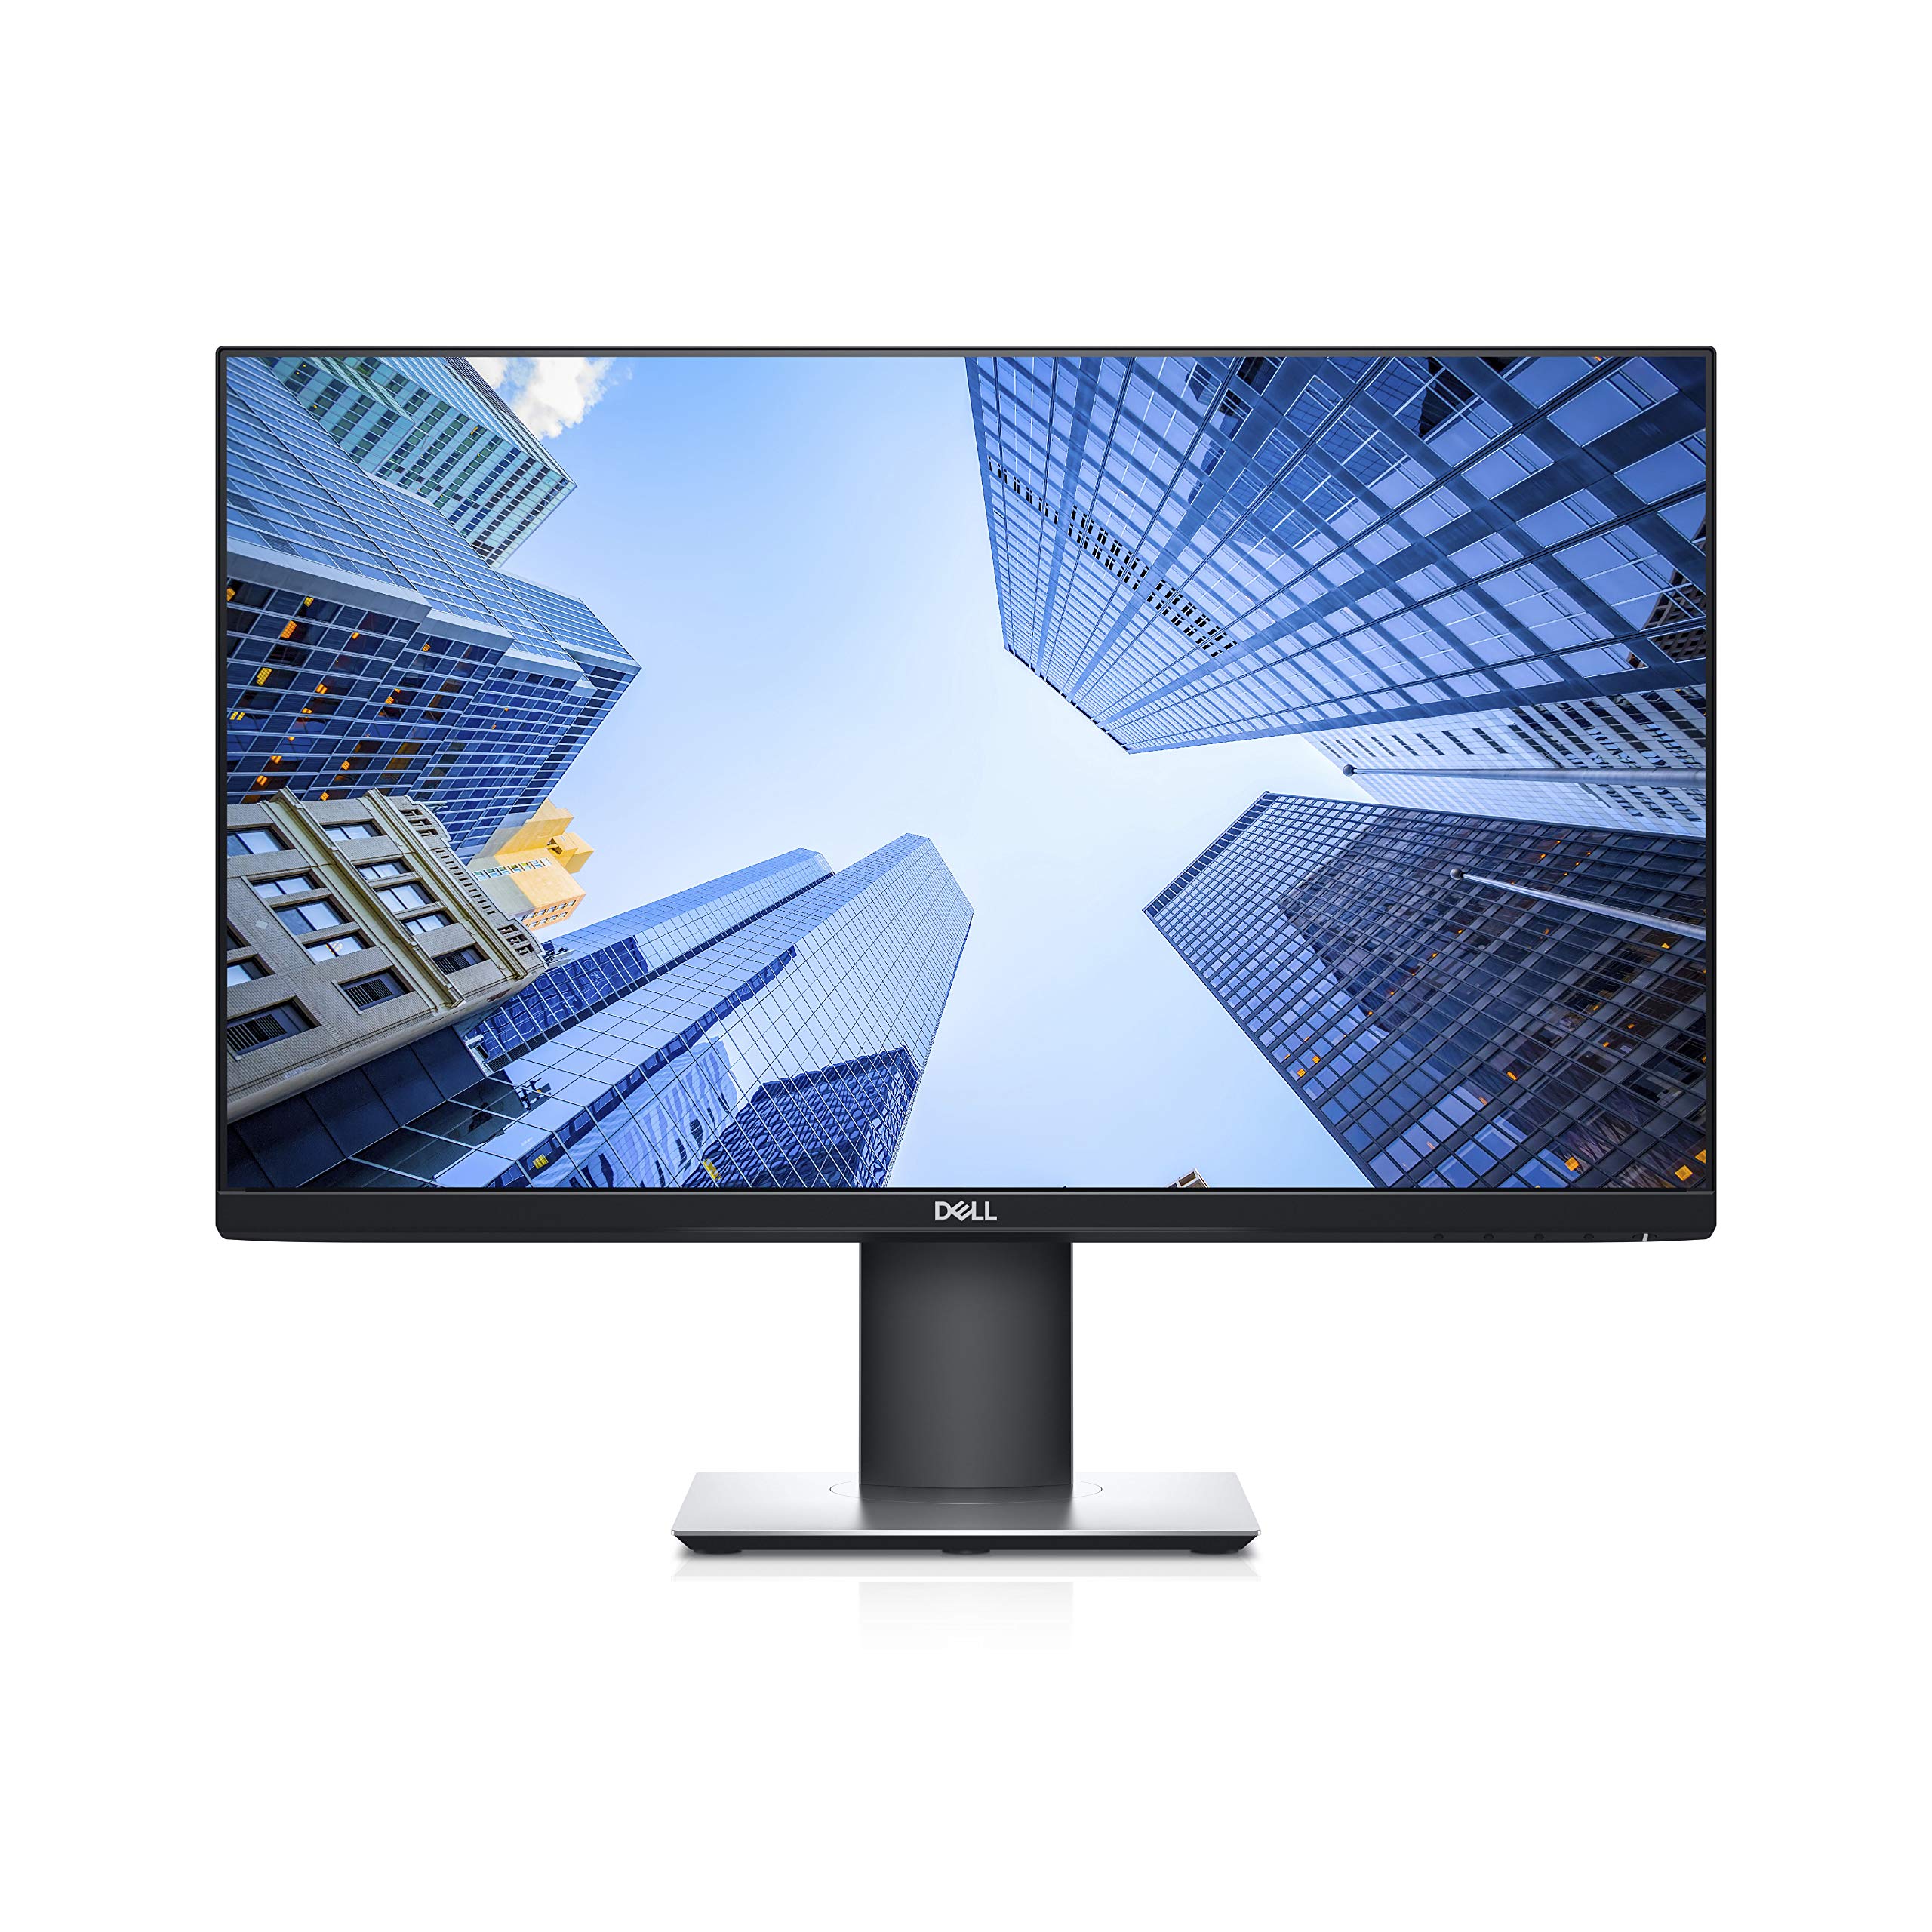 Book Cover Dell P2419H 24 Inch LED-Backlit, Anti-Glare, 3H Hard Coating IPS Monitor - (8 ms Response, FHD 1920 x 1080 at 60Hz, 1000:1 Contrast, with ComfortView DisplayPort, VGA, HDMI and USB), Black Single